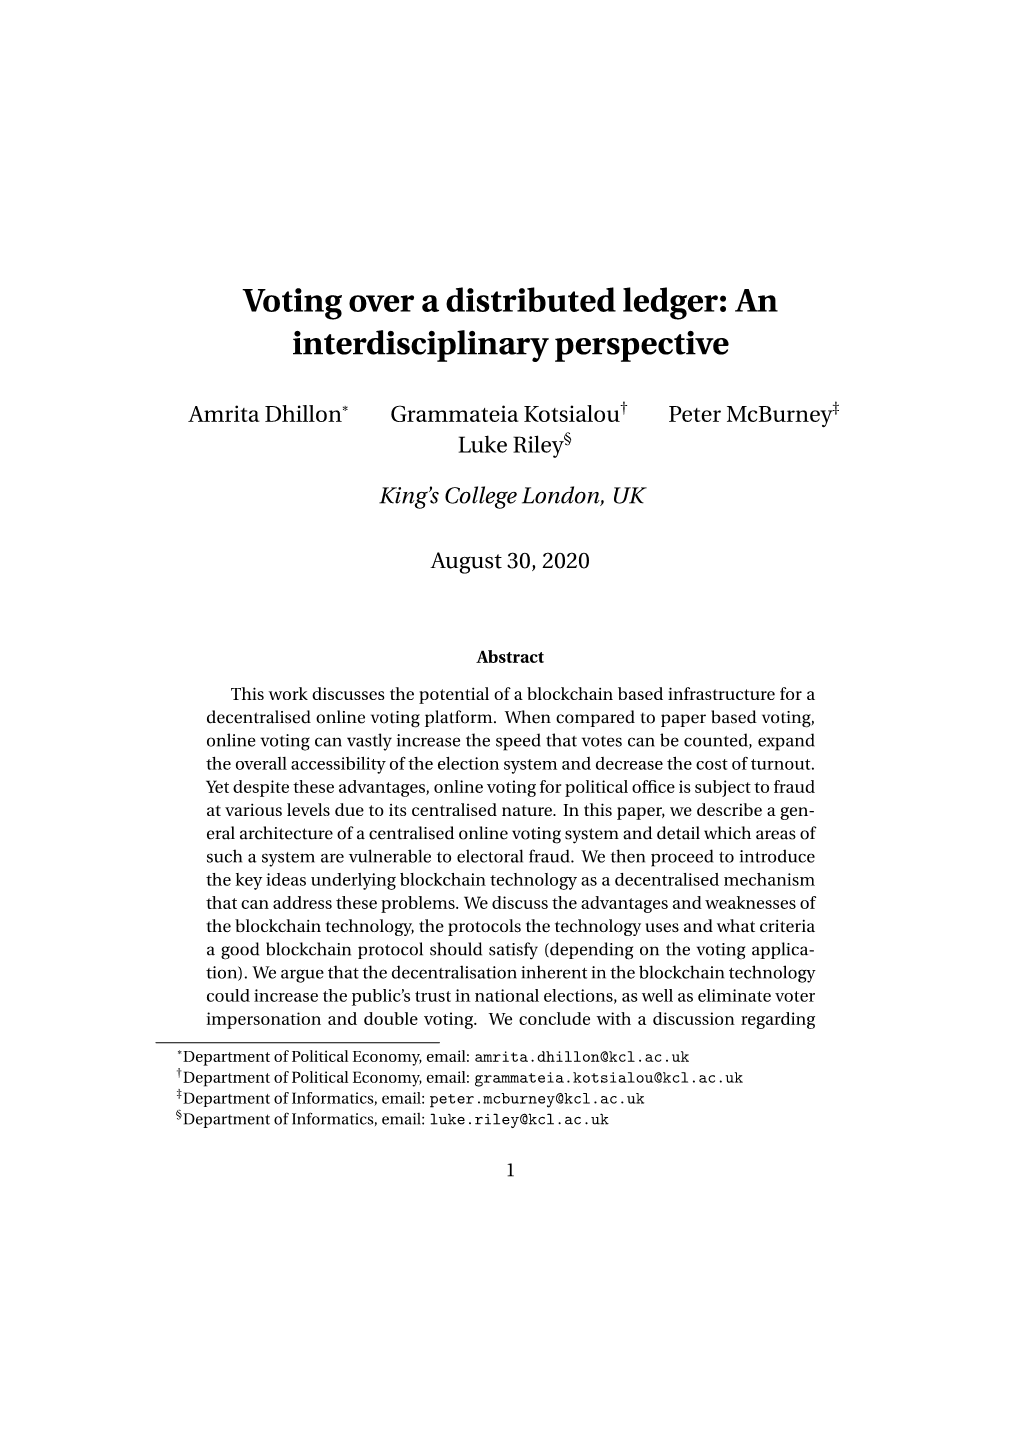 Voting Over a Distributed Ledger: an Interdisciplinary Perspective